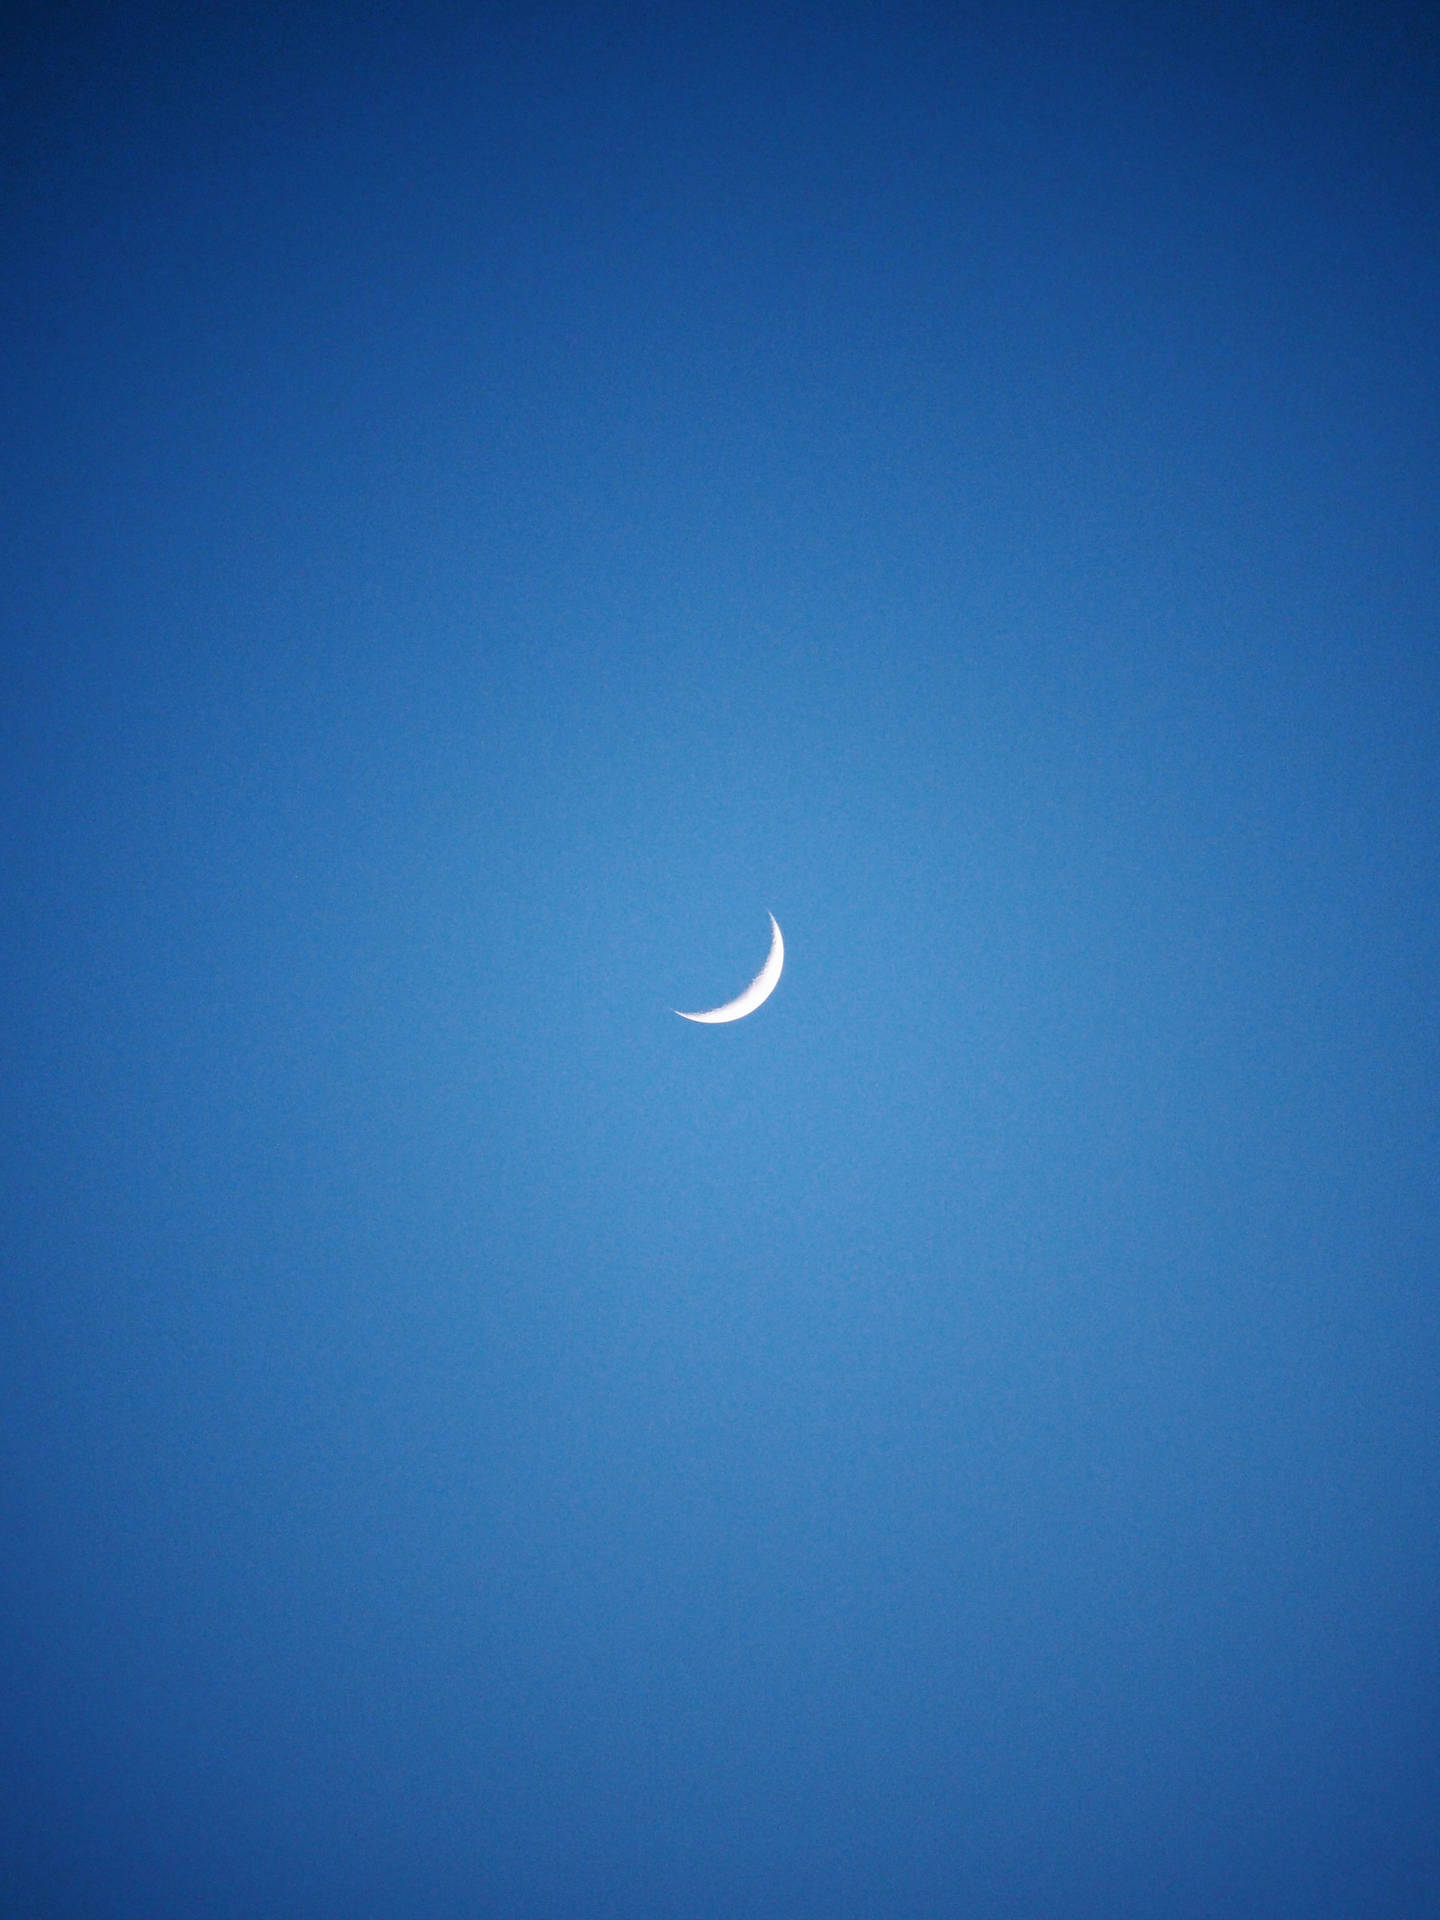 Dark Blue Sky And Crescent Moon Background